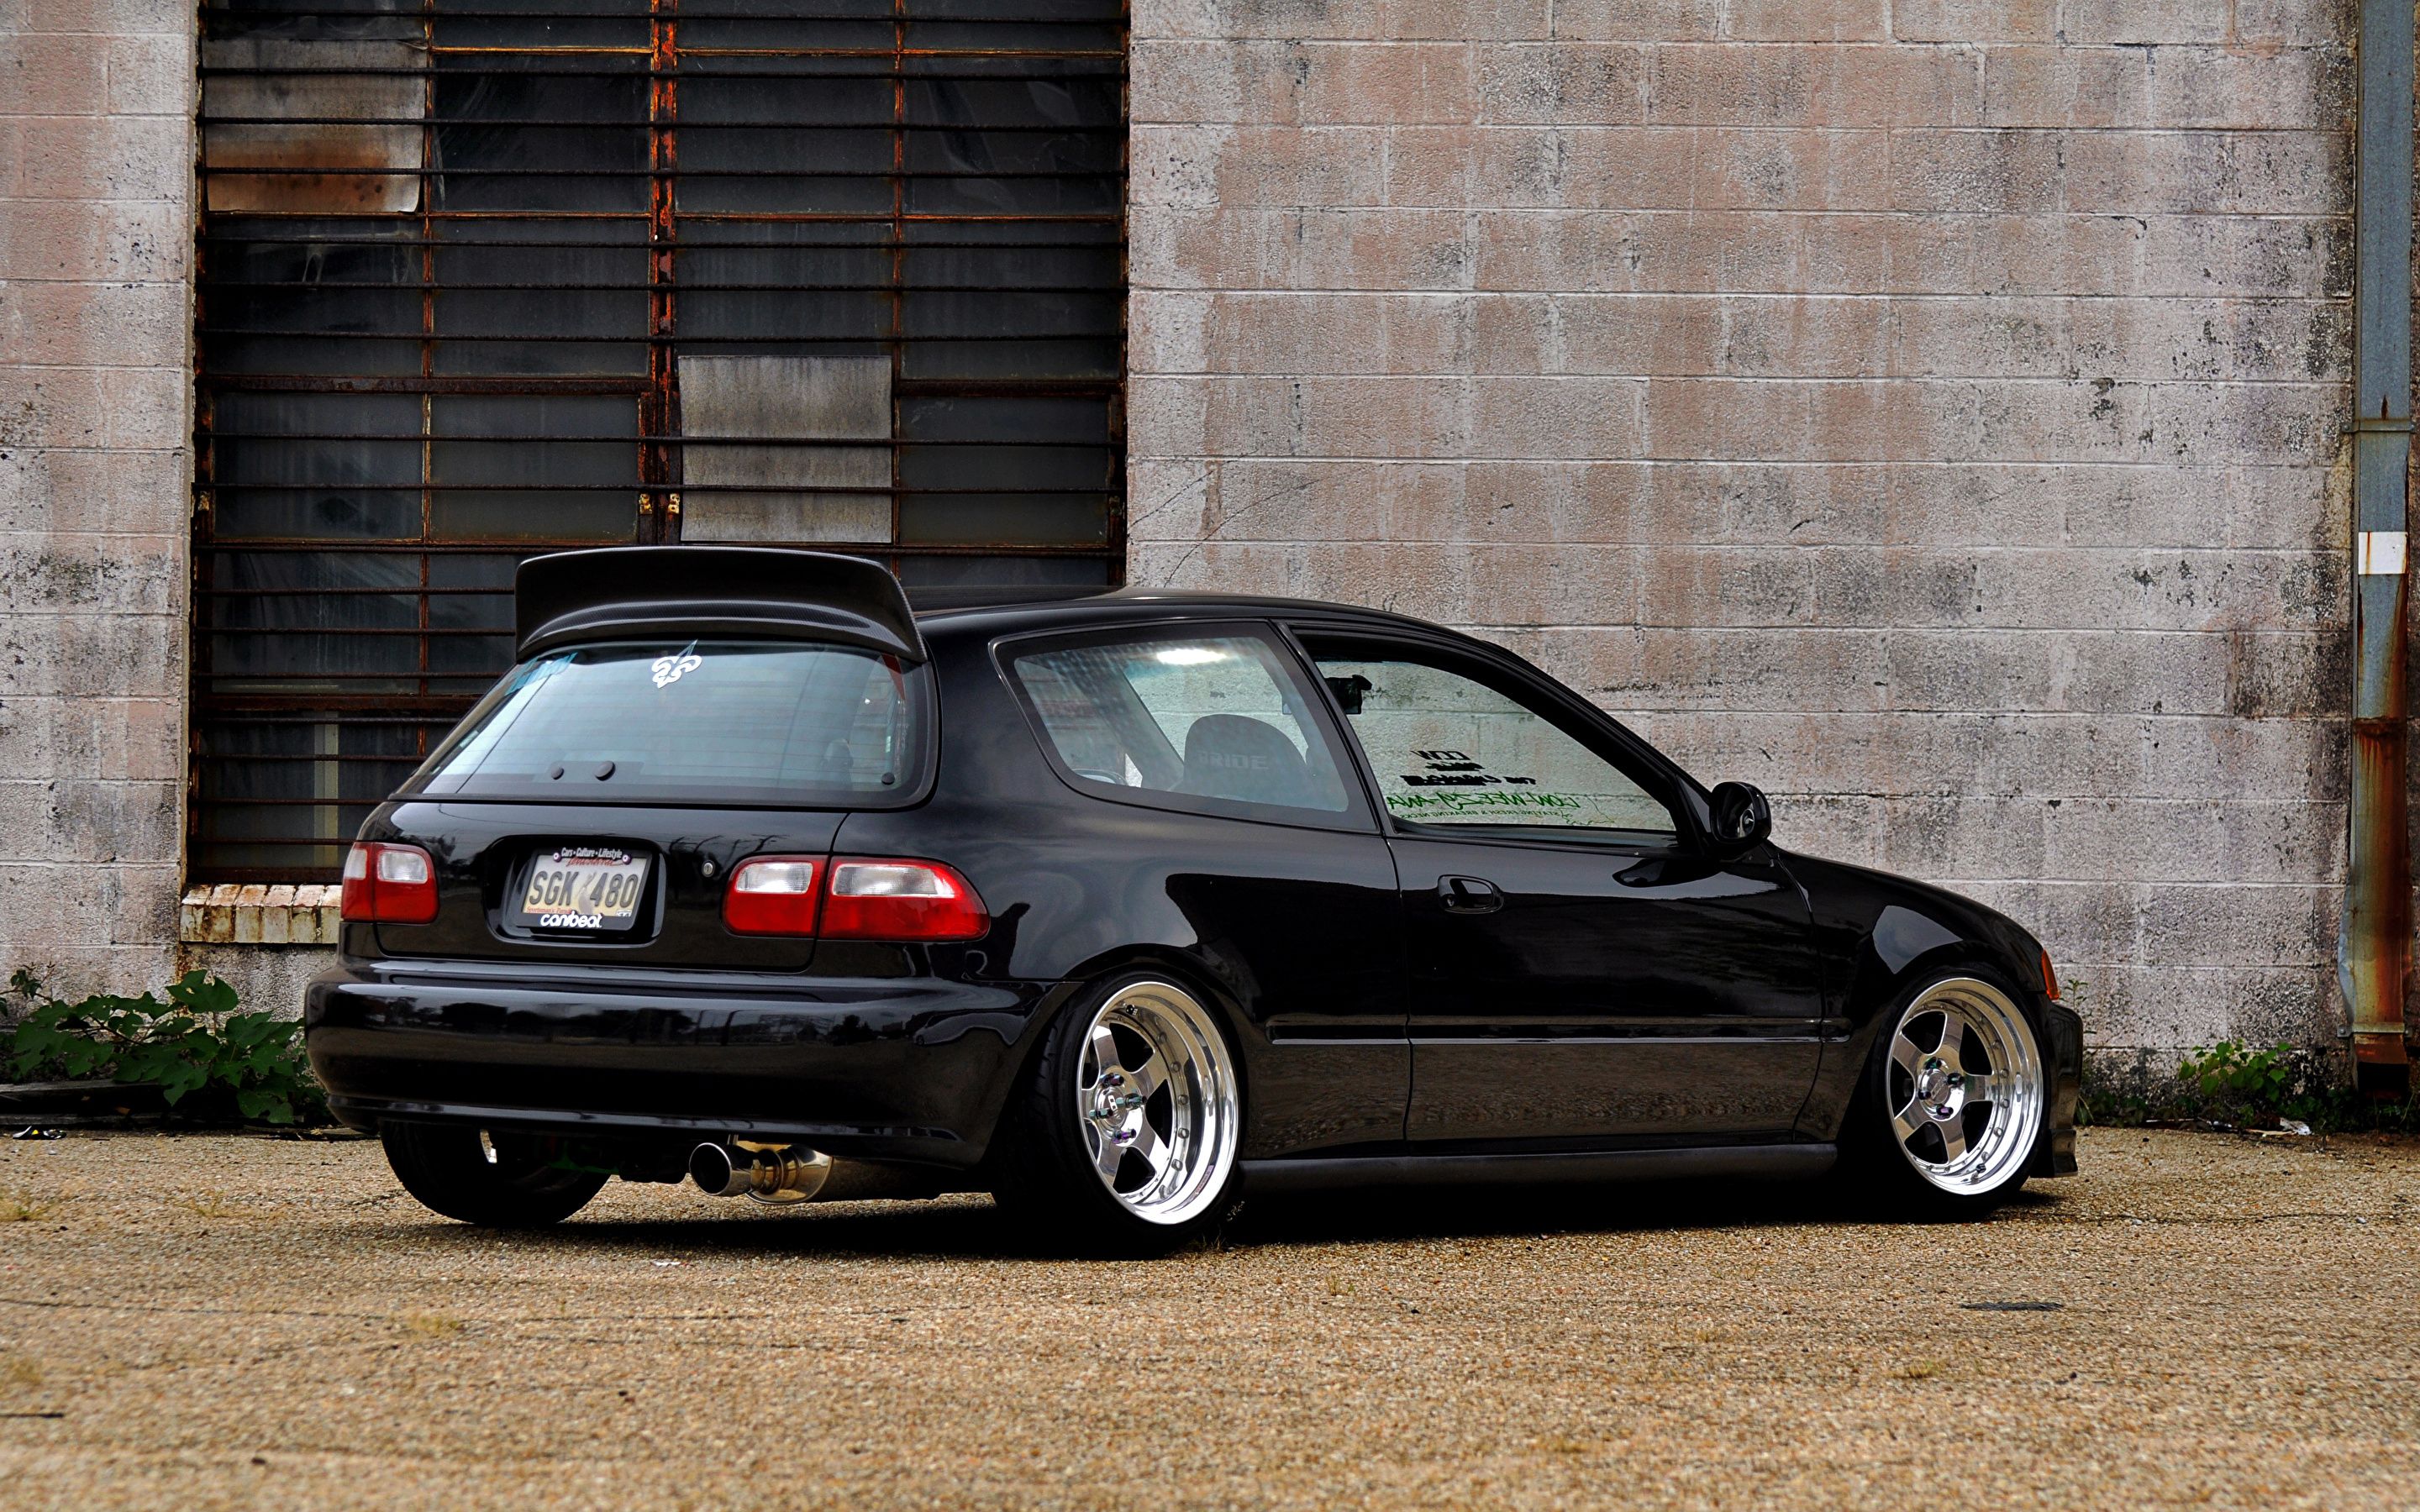 Picture Honda Civic eg6 Stance BellyScrapers Low CCW Black 2880x1800